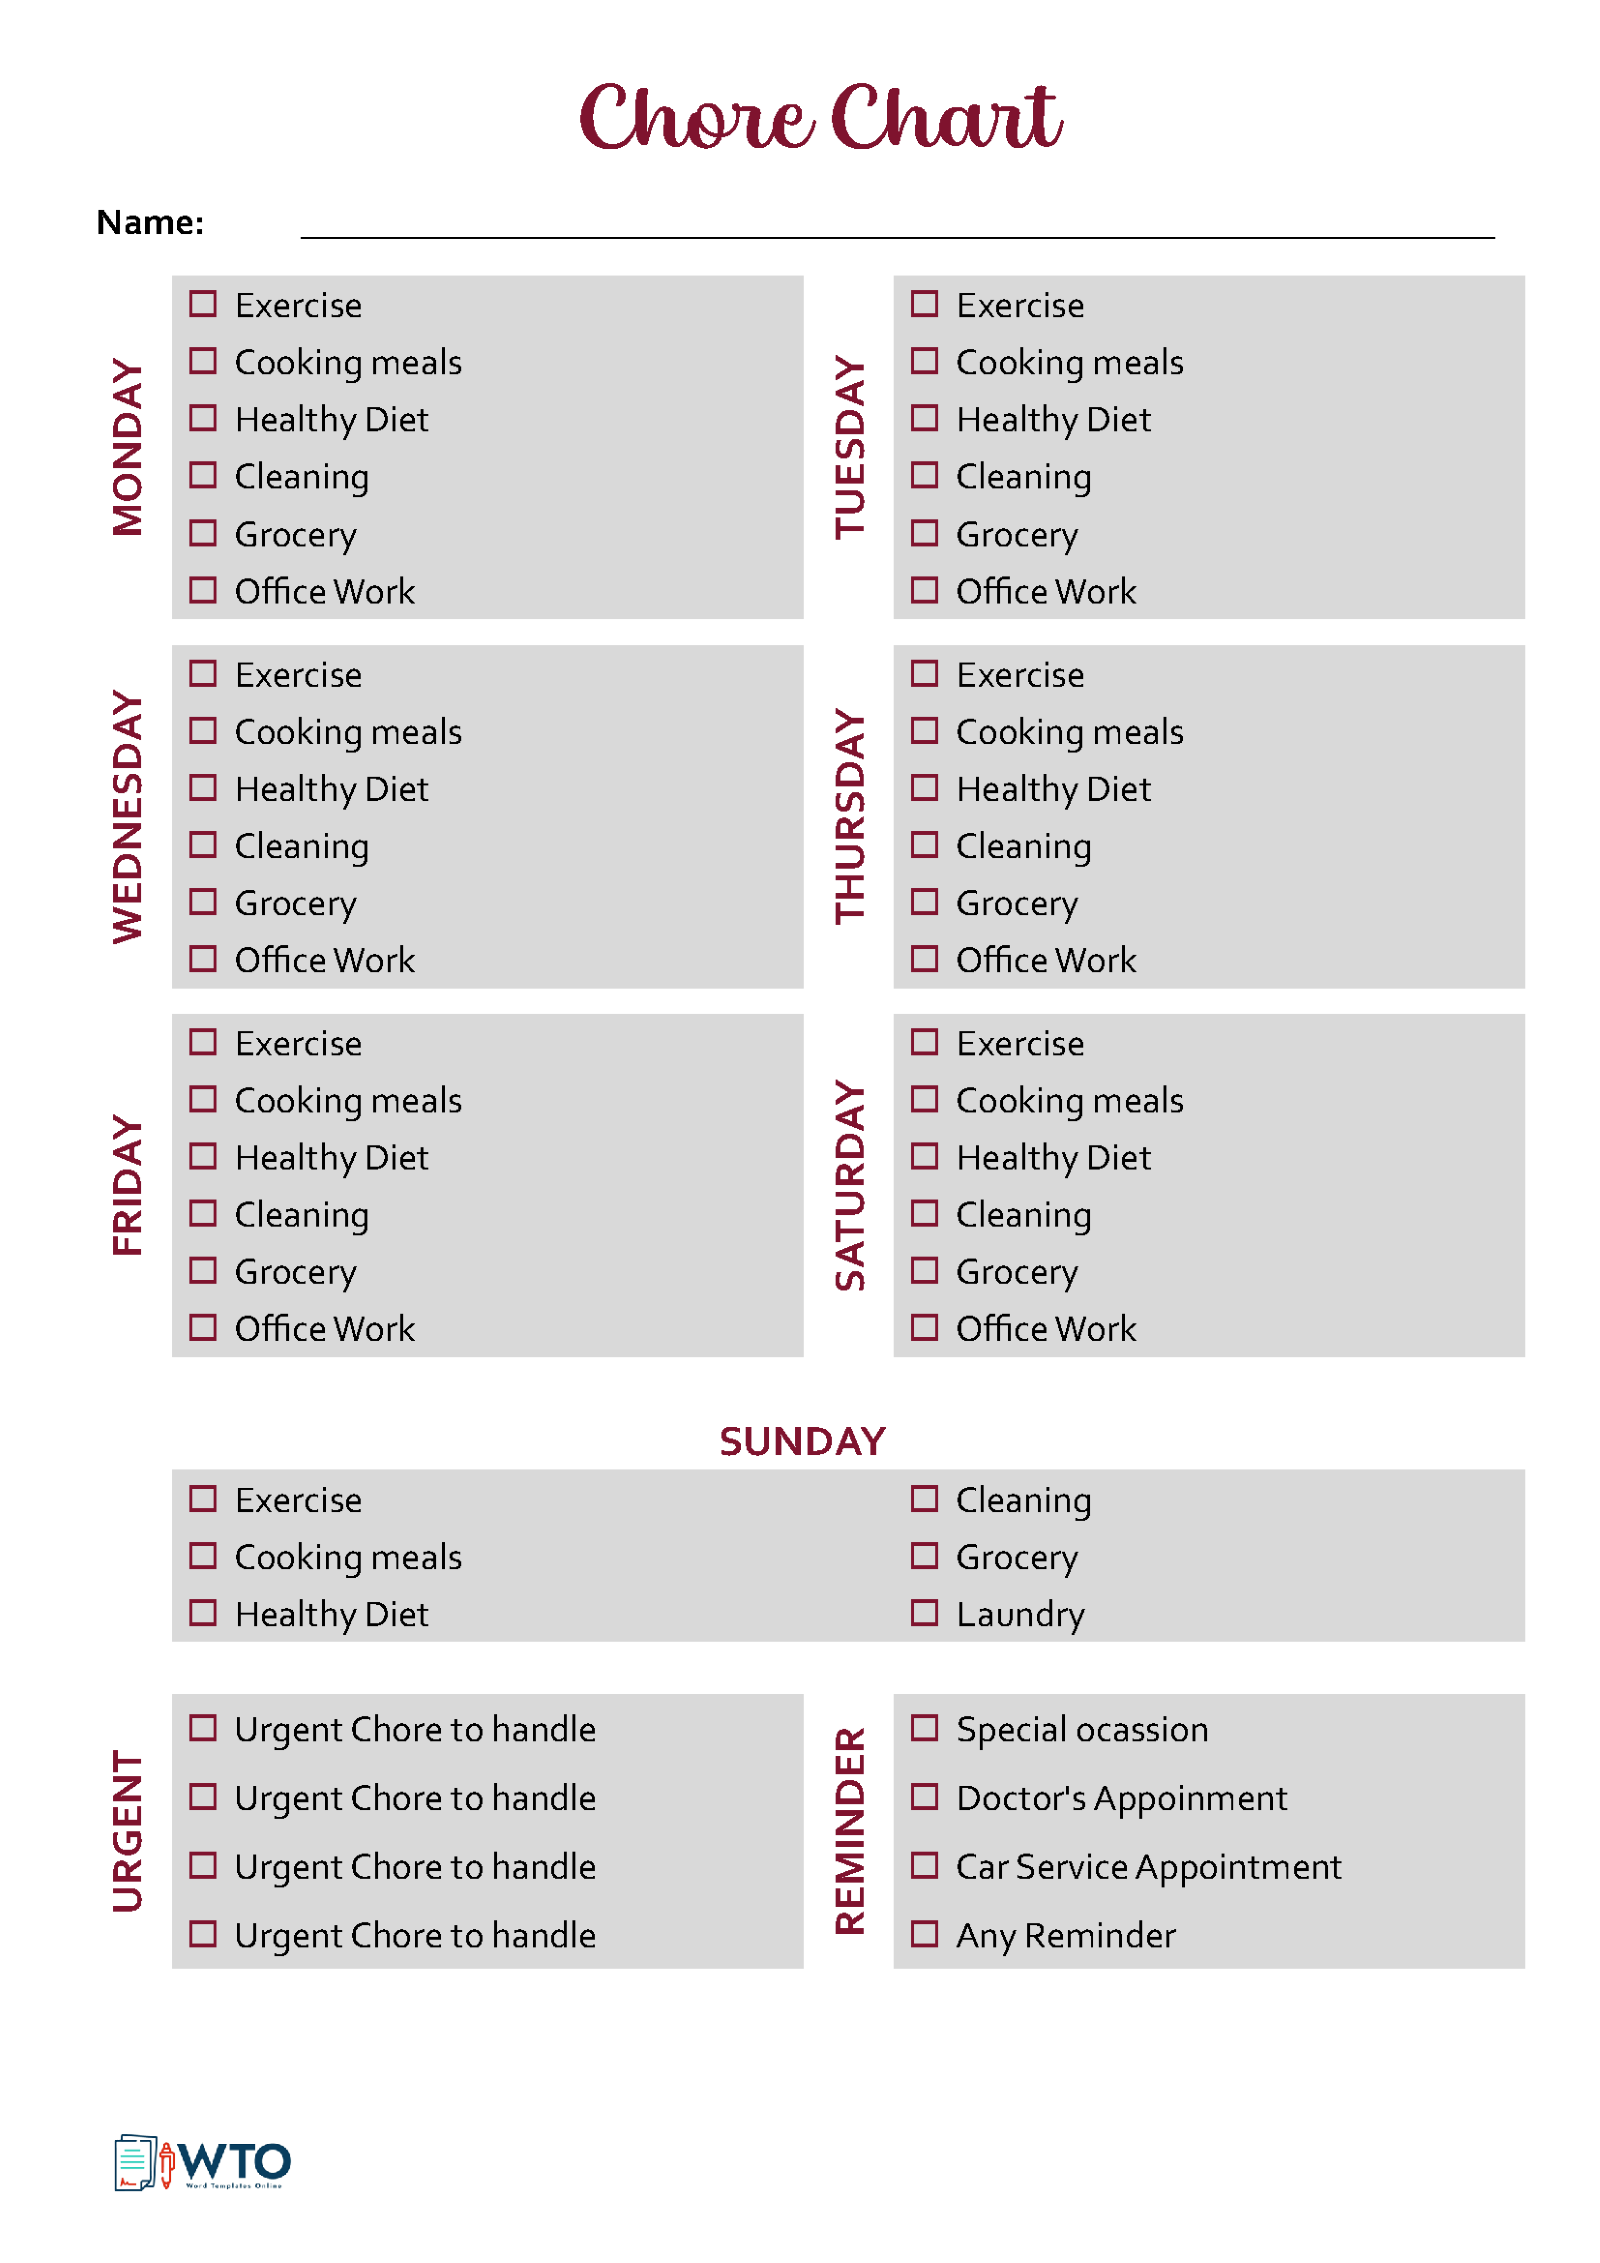 Streamlined Chore Chart Format: Free Download